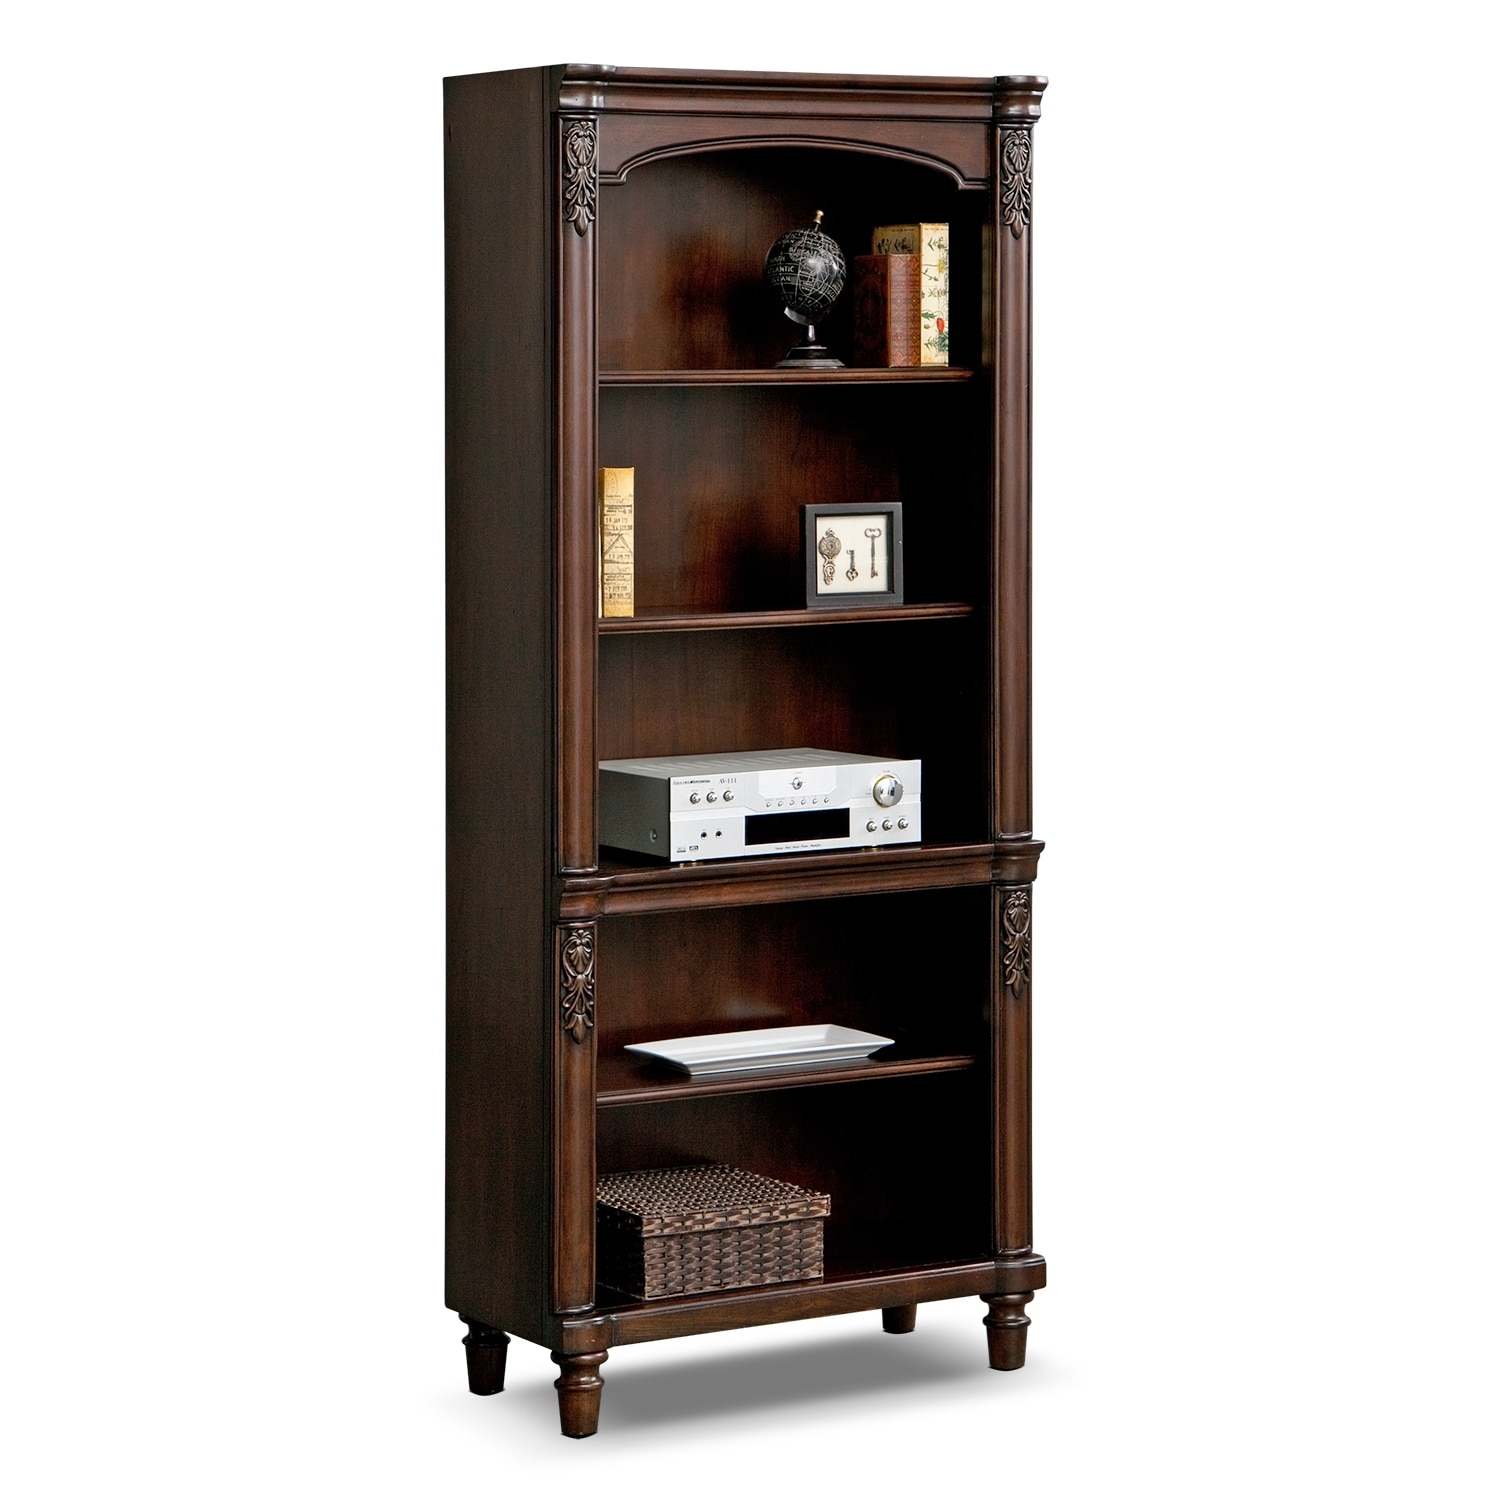 Undefined Value City Furniture, Value City Bookcase Bedroom